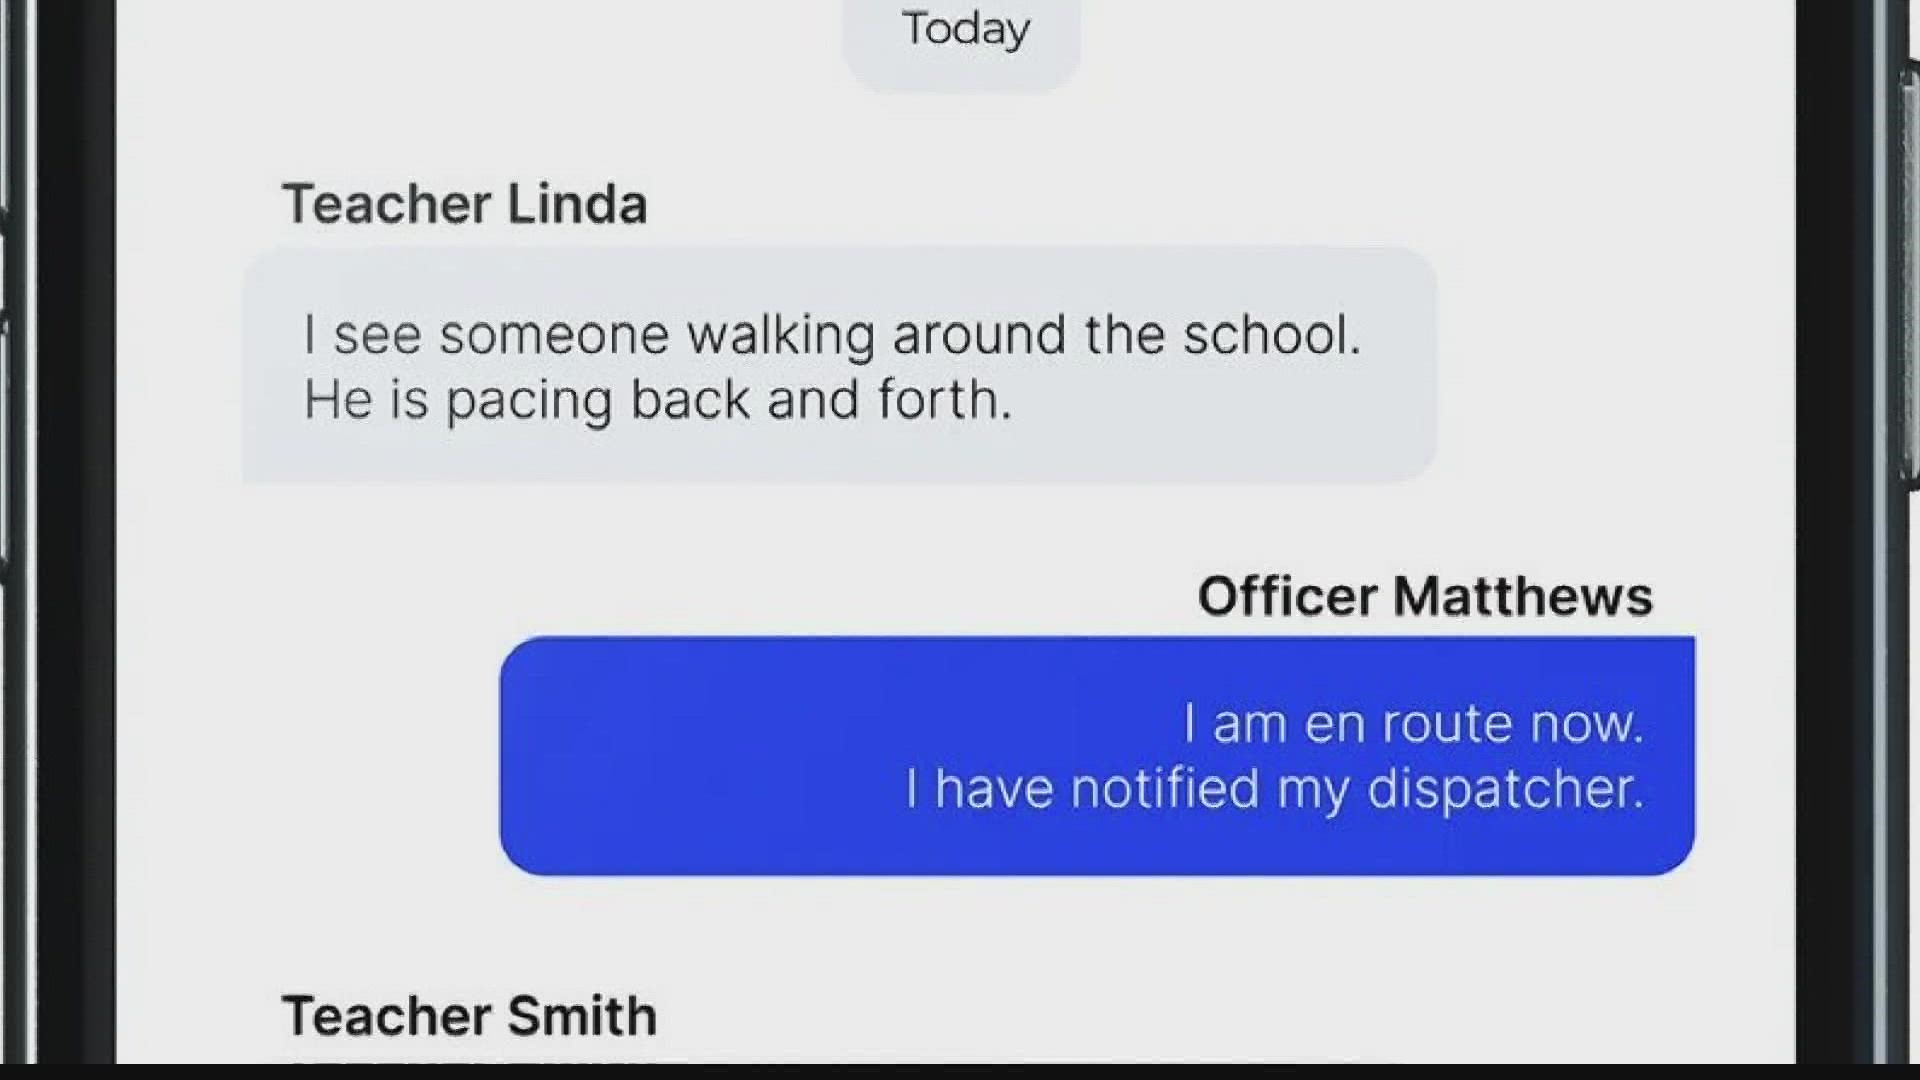 Responder App works by allowing educators to text directly with responding officers without dialing 911 in the event of an emergency.